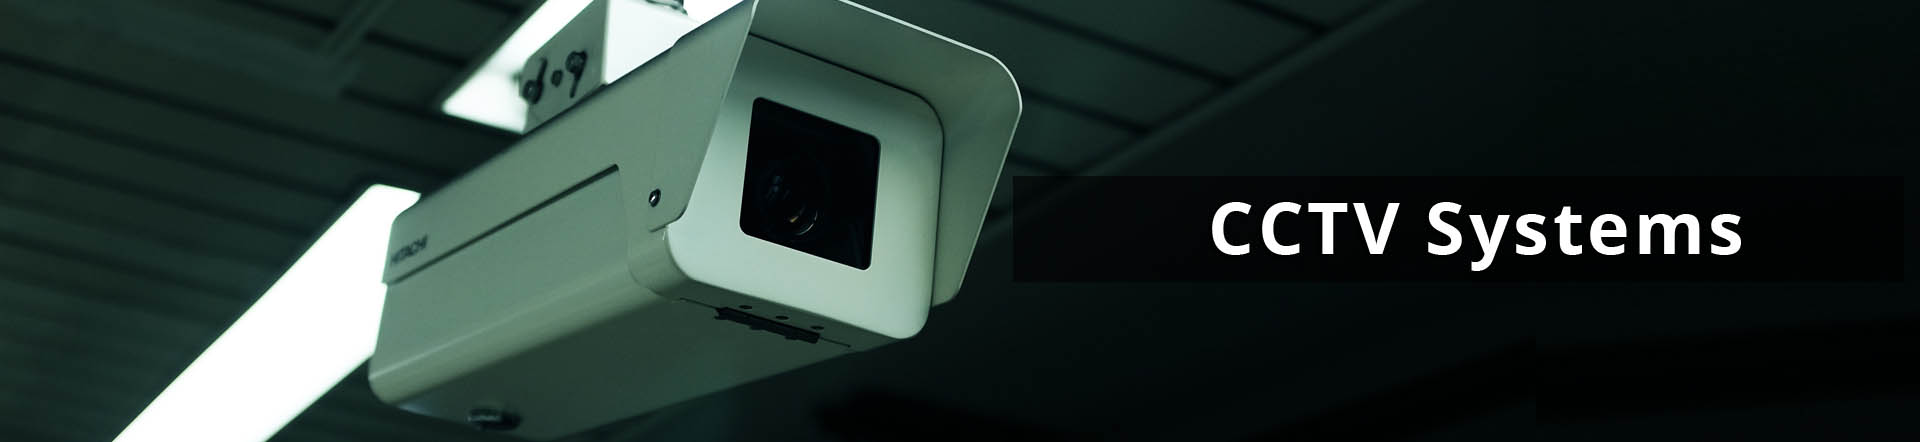 CCTV Systems image